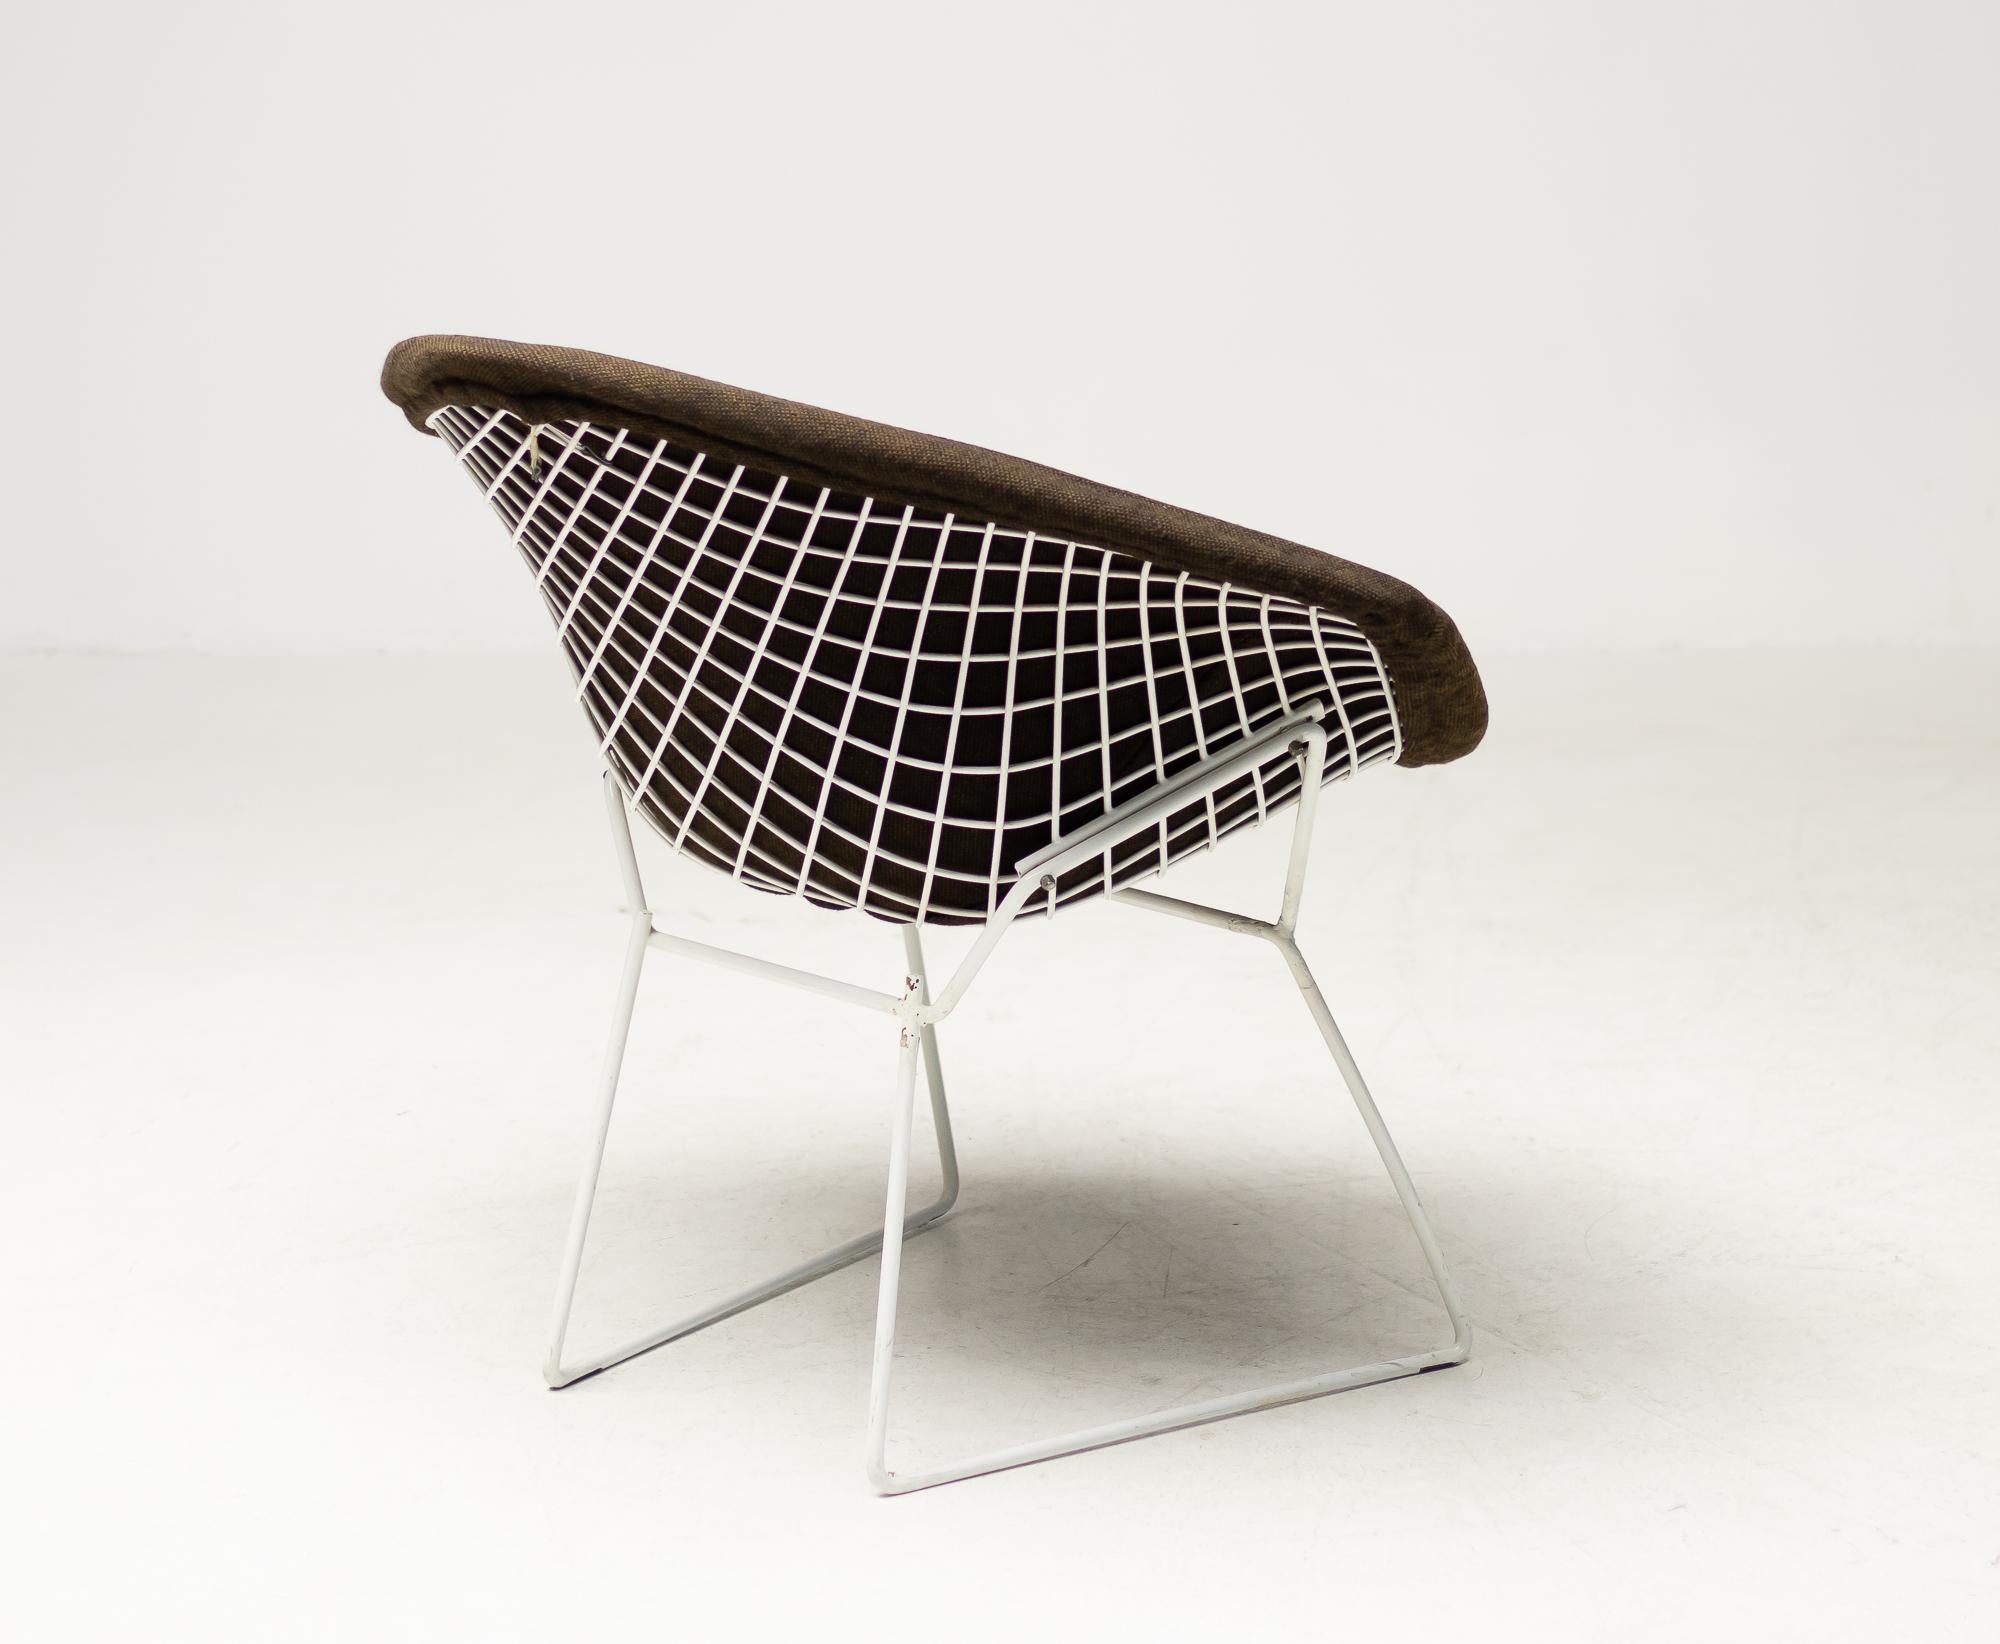 Designed by Harry Bertoia for Knoll in 1952, the Diamond chair is a classic of steel-rod construction.
This example circa 1960, in nice vintage condition with the original upholstery.